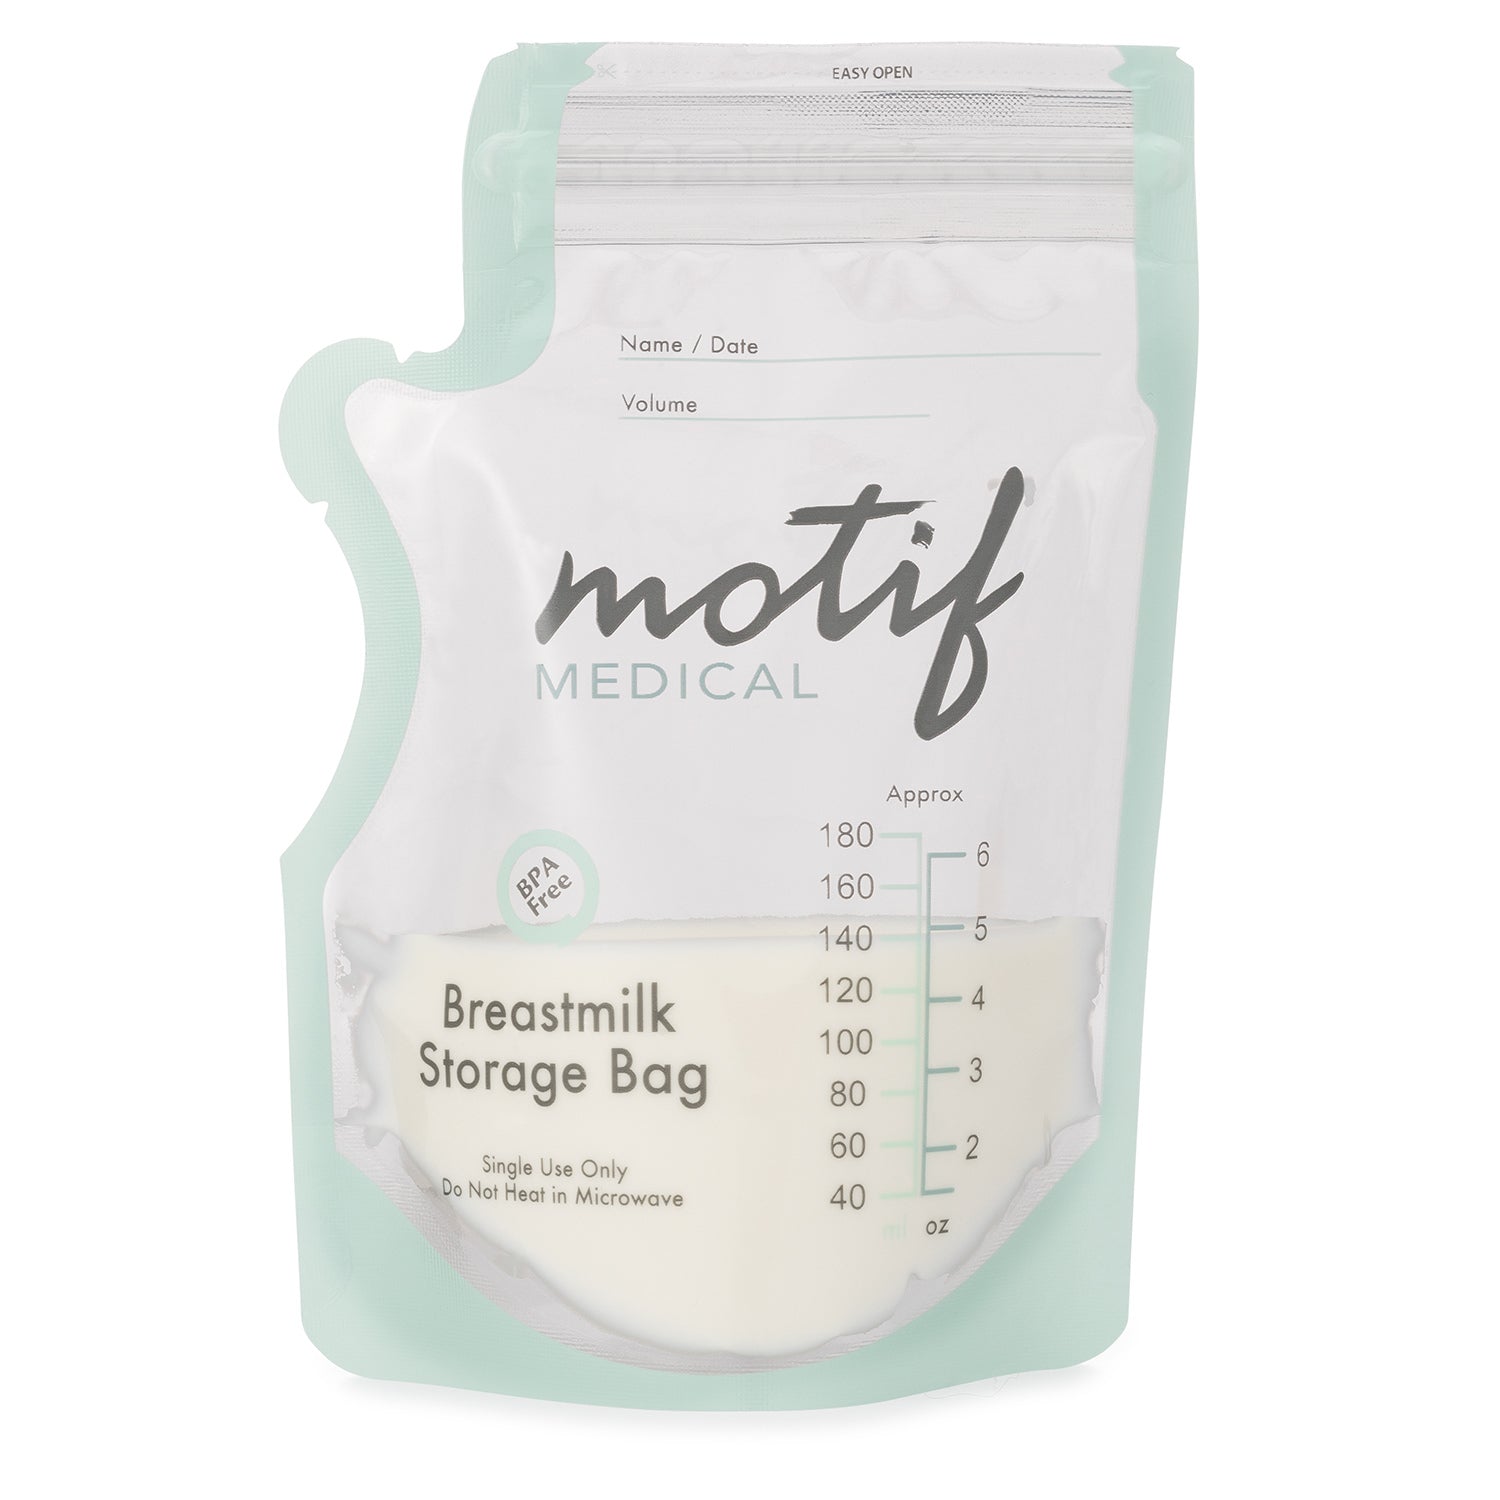 Motif Medical BPA Free Breastmilk Storage Bag. Place for Name/Date and Volume. Do Not Heat In Microwave. Single Use Only.